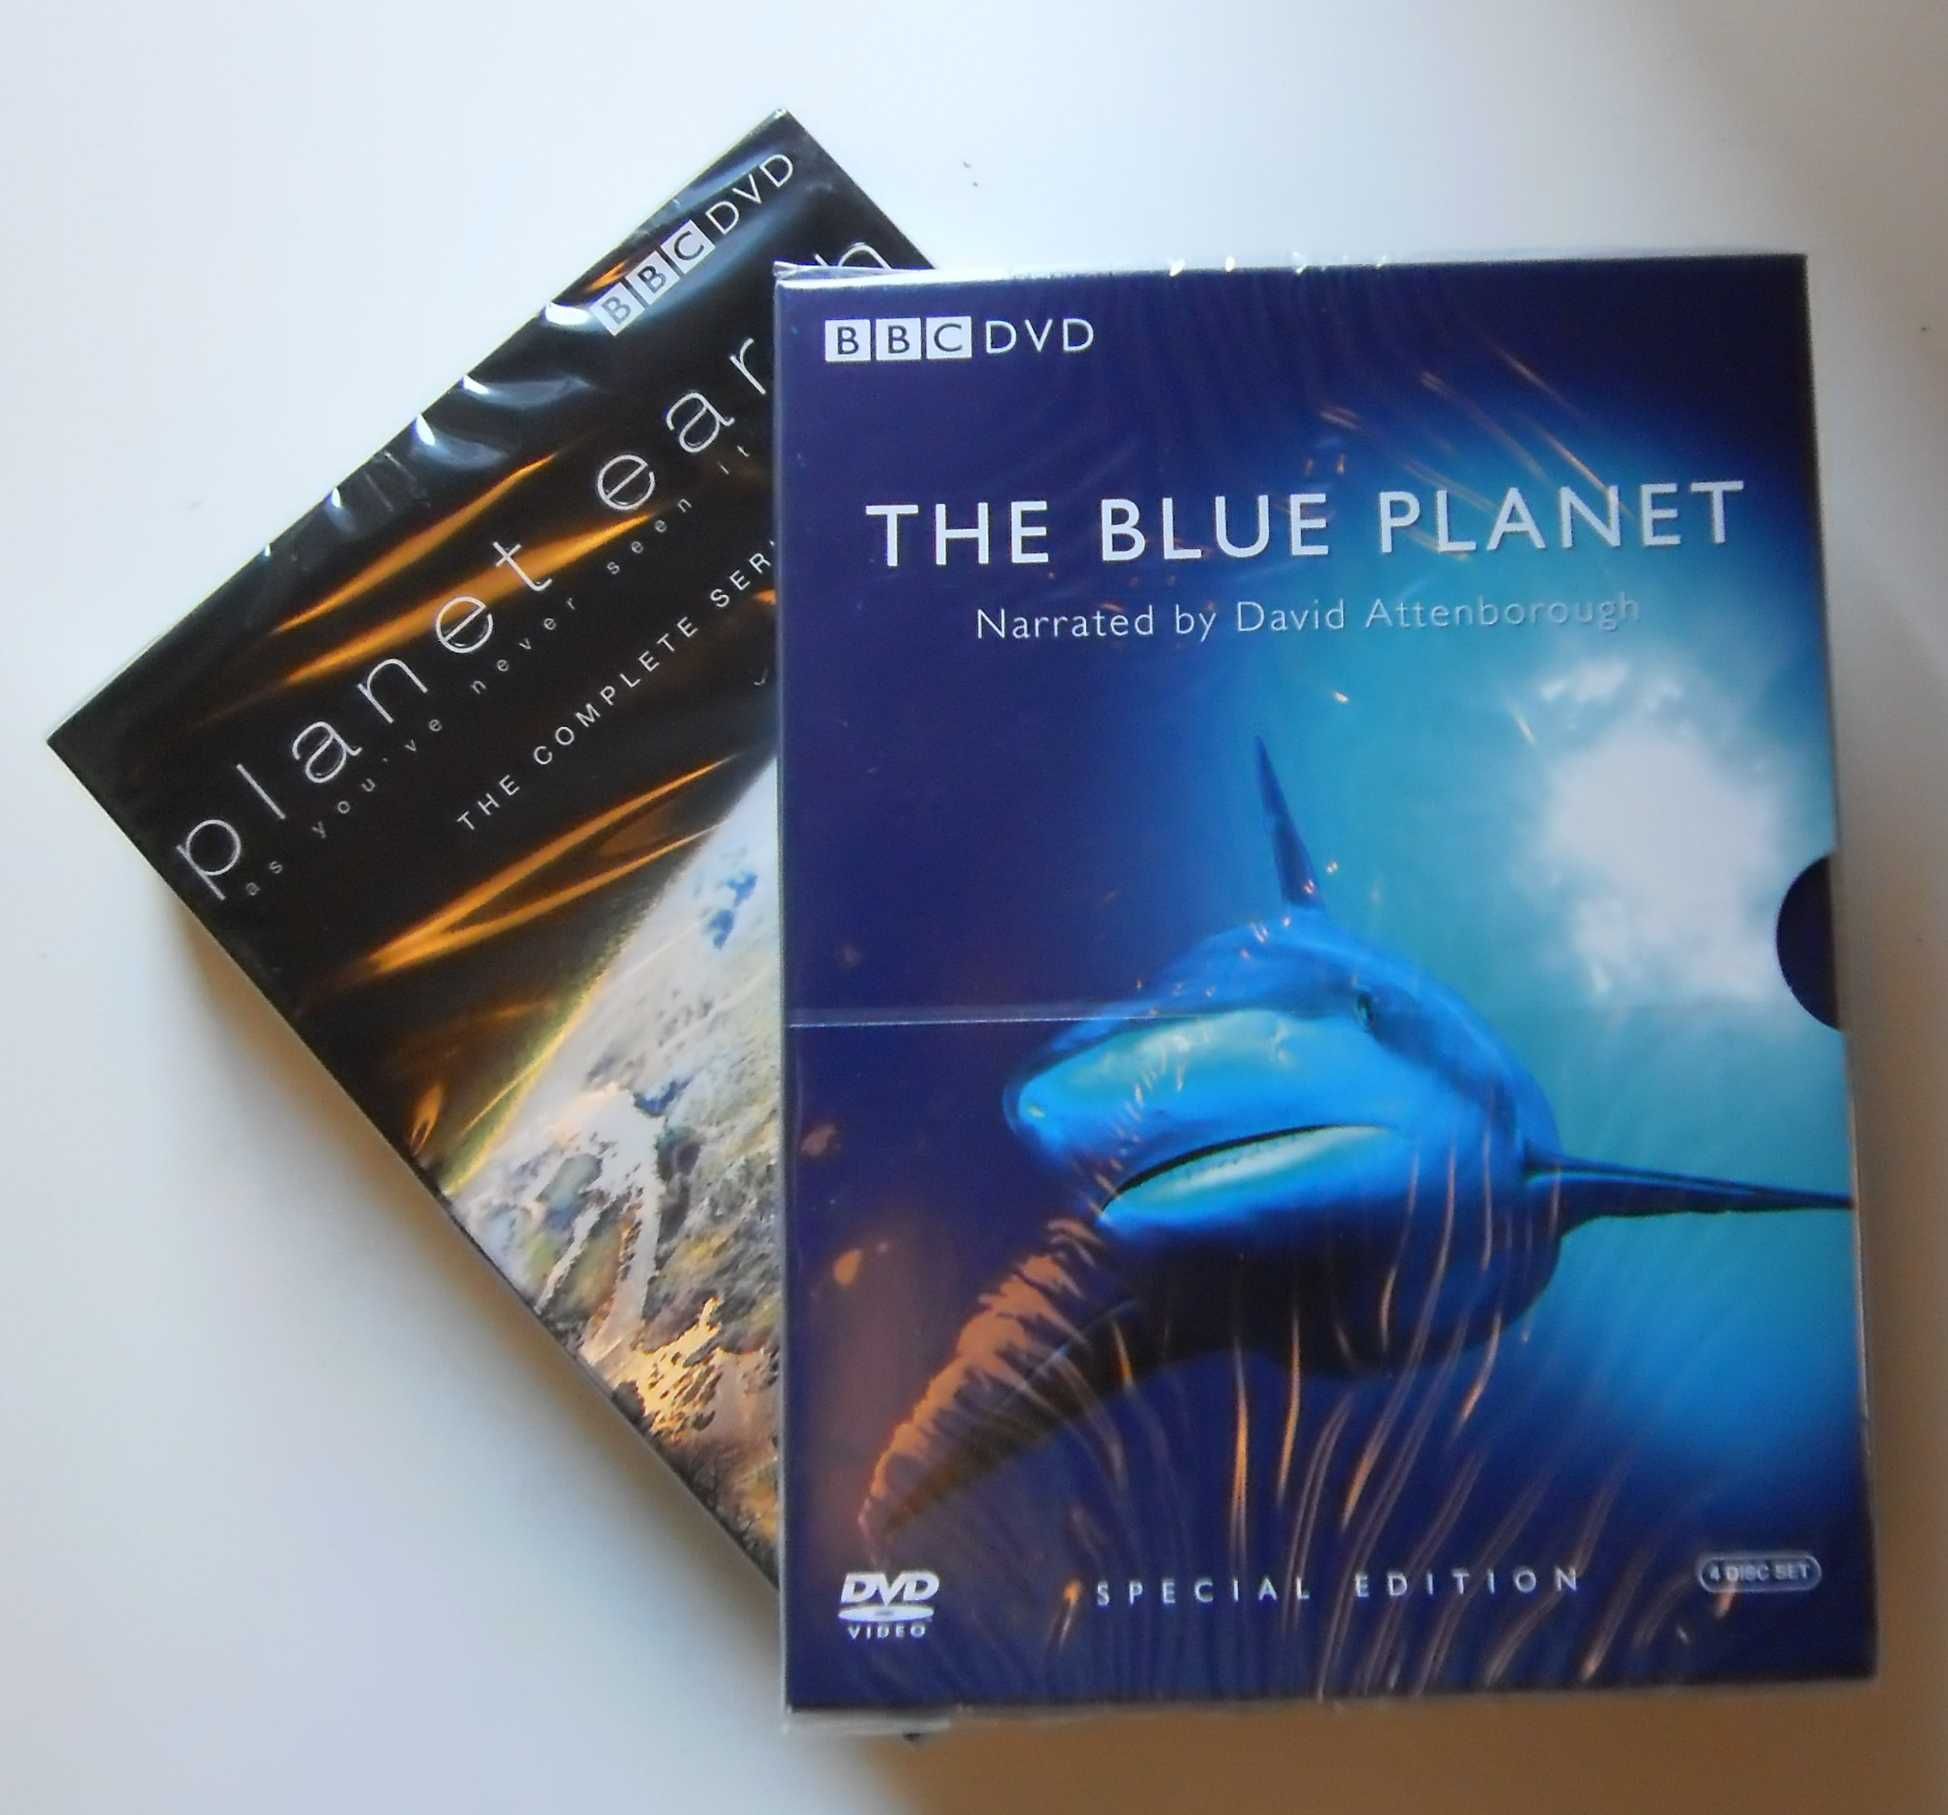 PACK 4 DVDs Selados "Blue Planet" Complete BBC Series Special Ed 2005